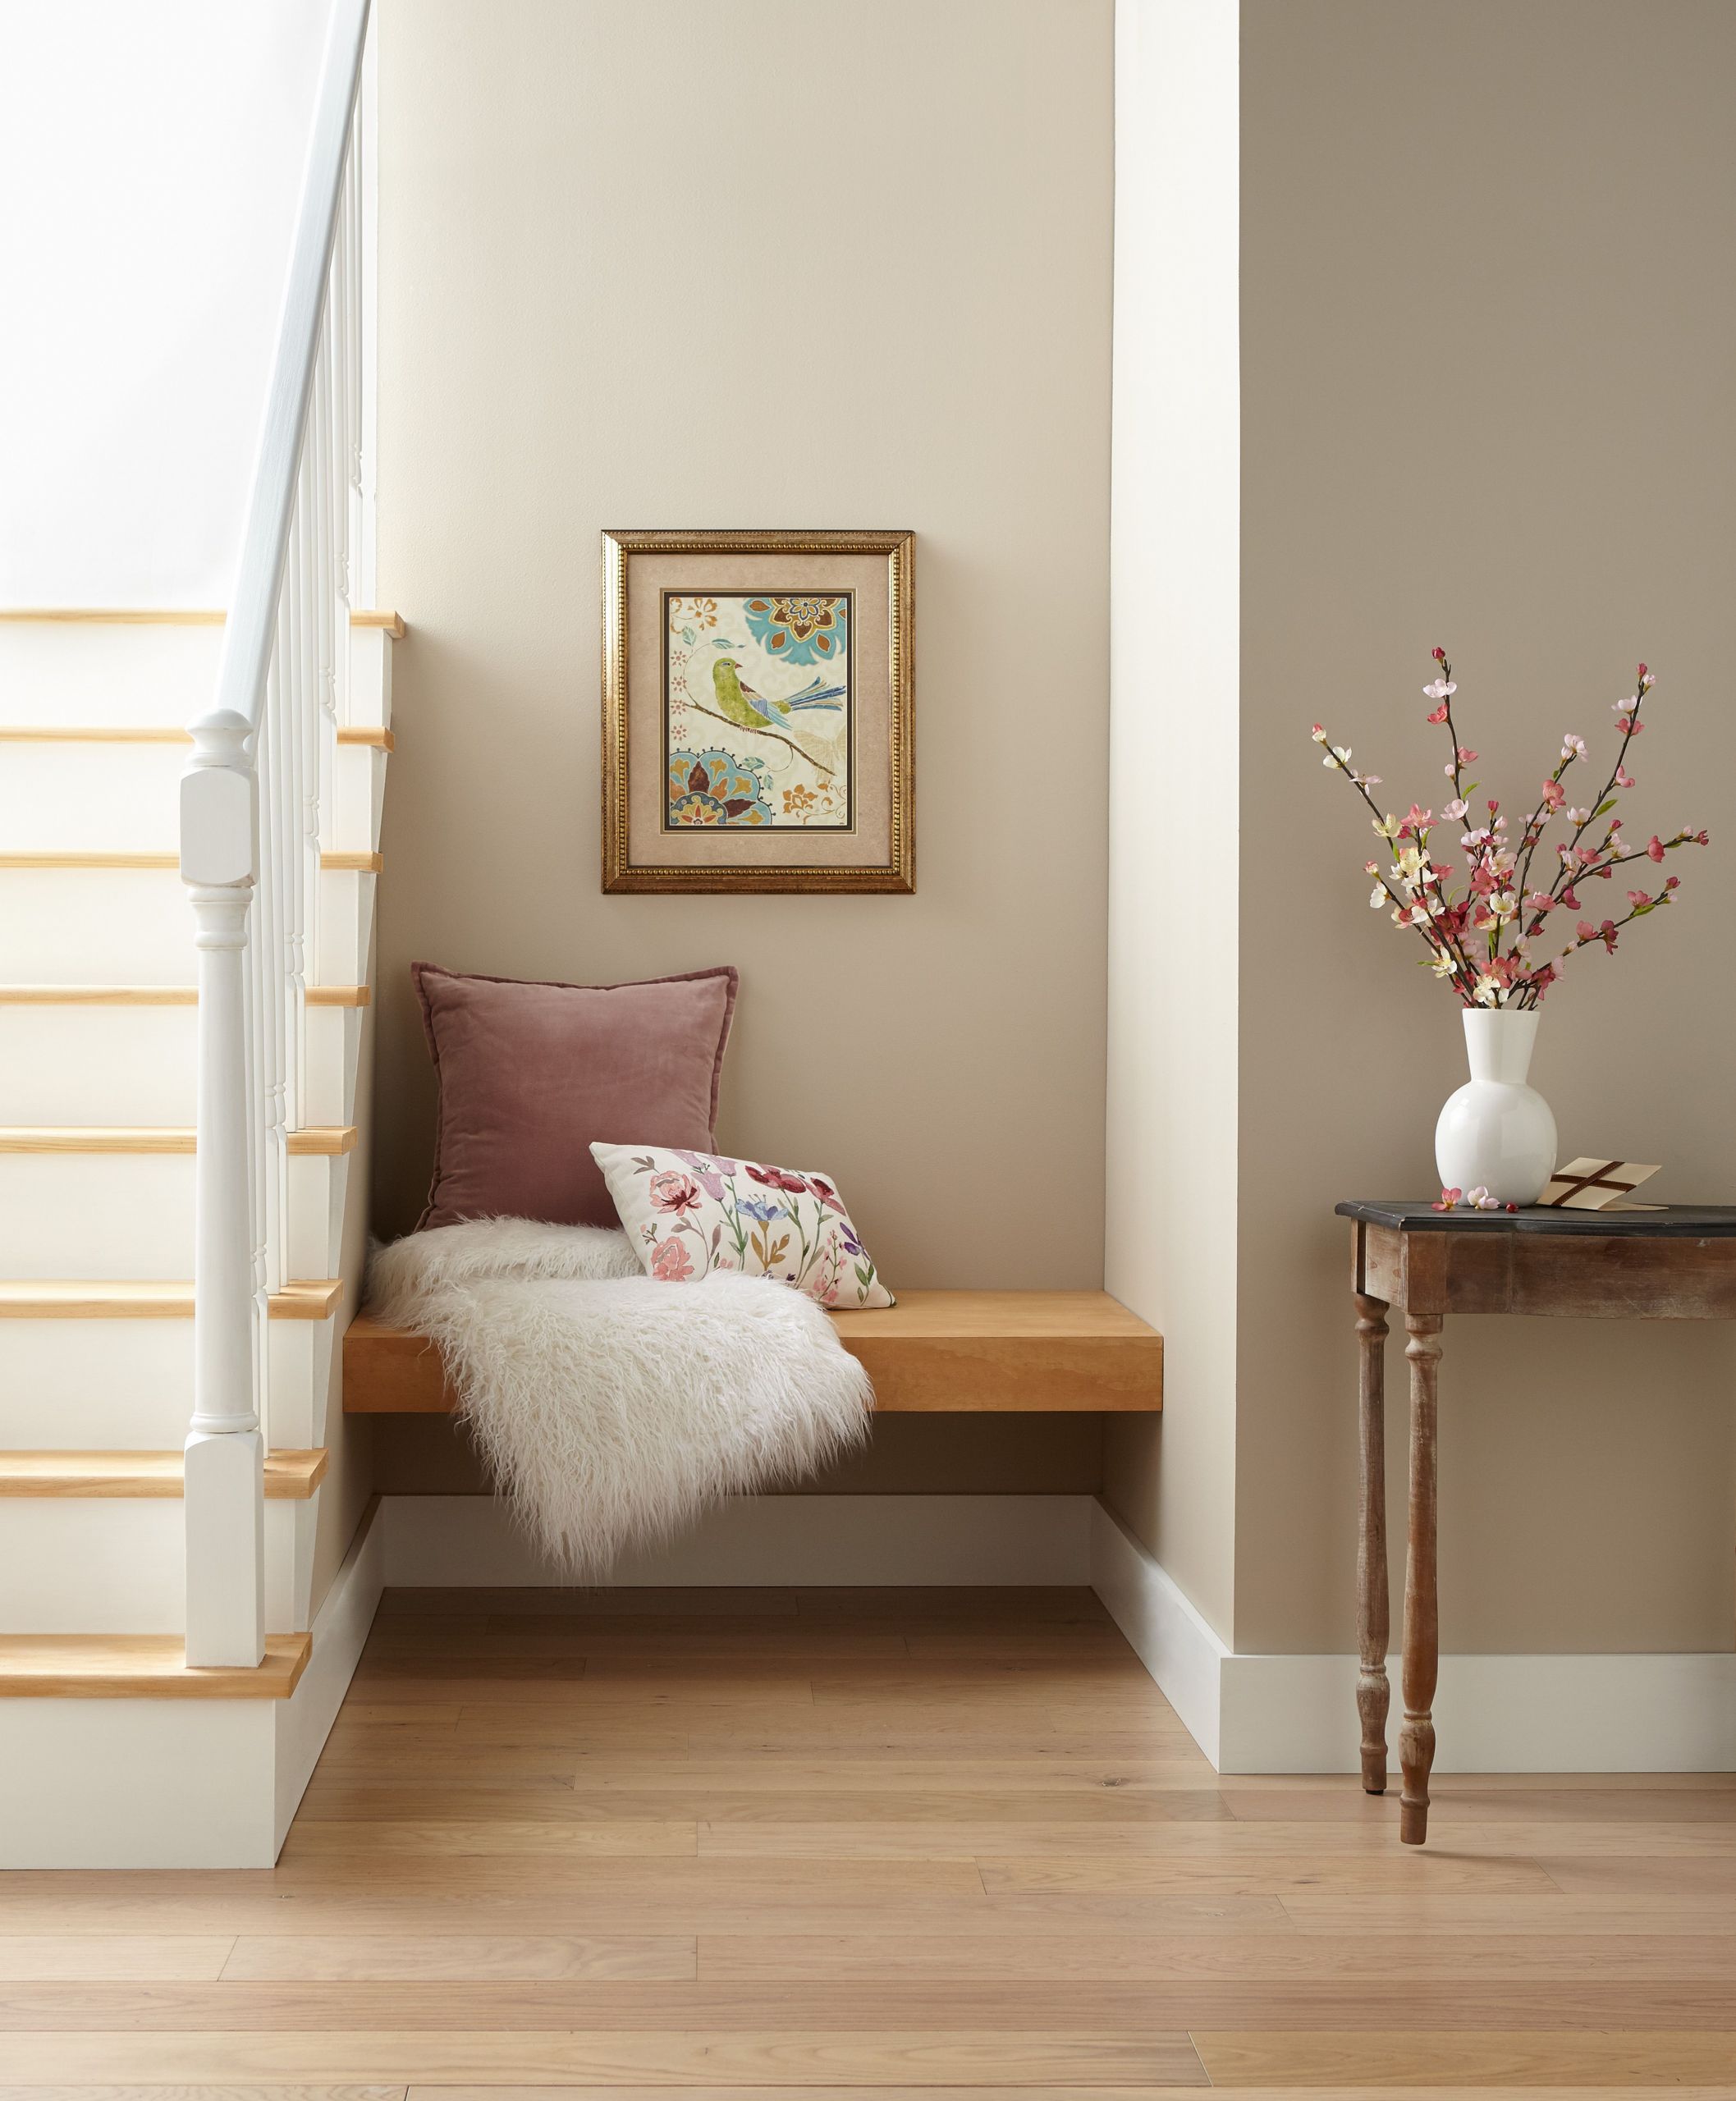 Paint Colors For Bedroom 2020
 These Are the Paint Color Trends for 2020 According to Behr